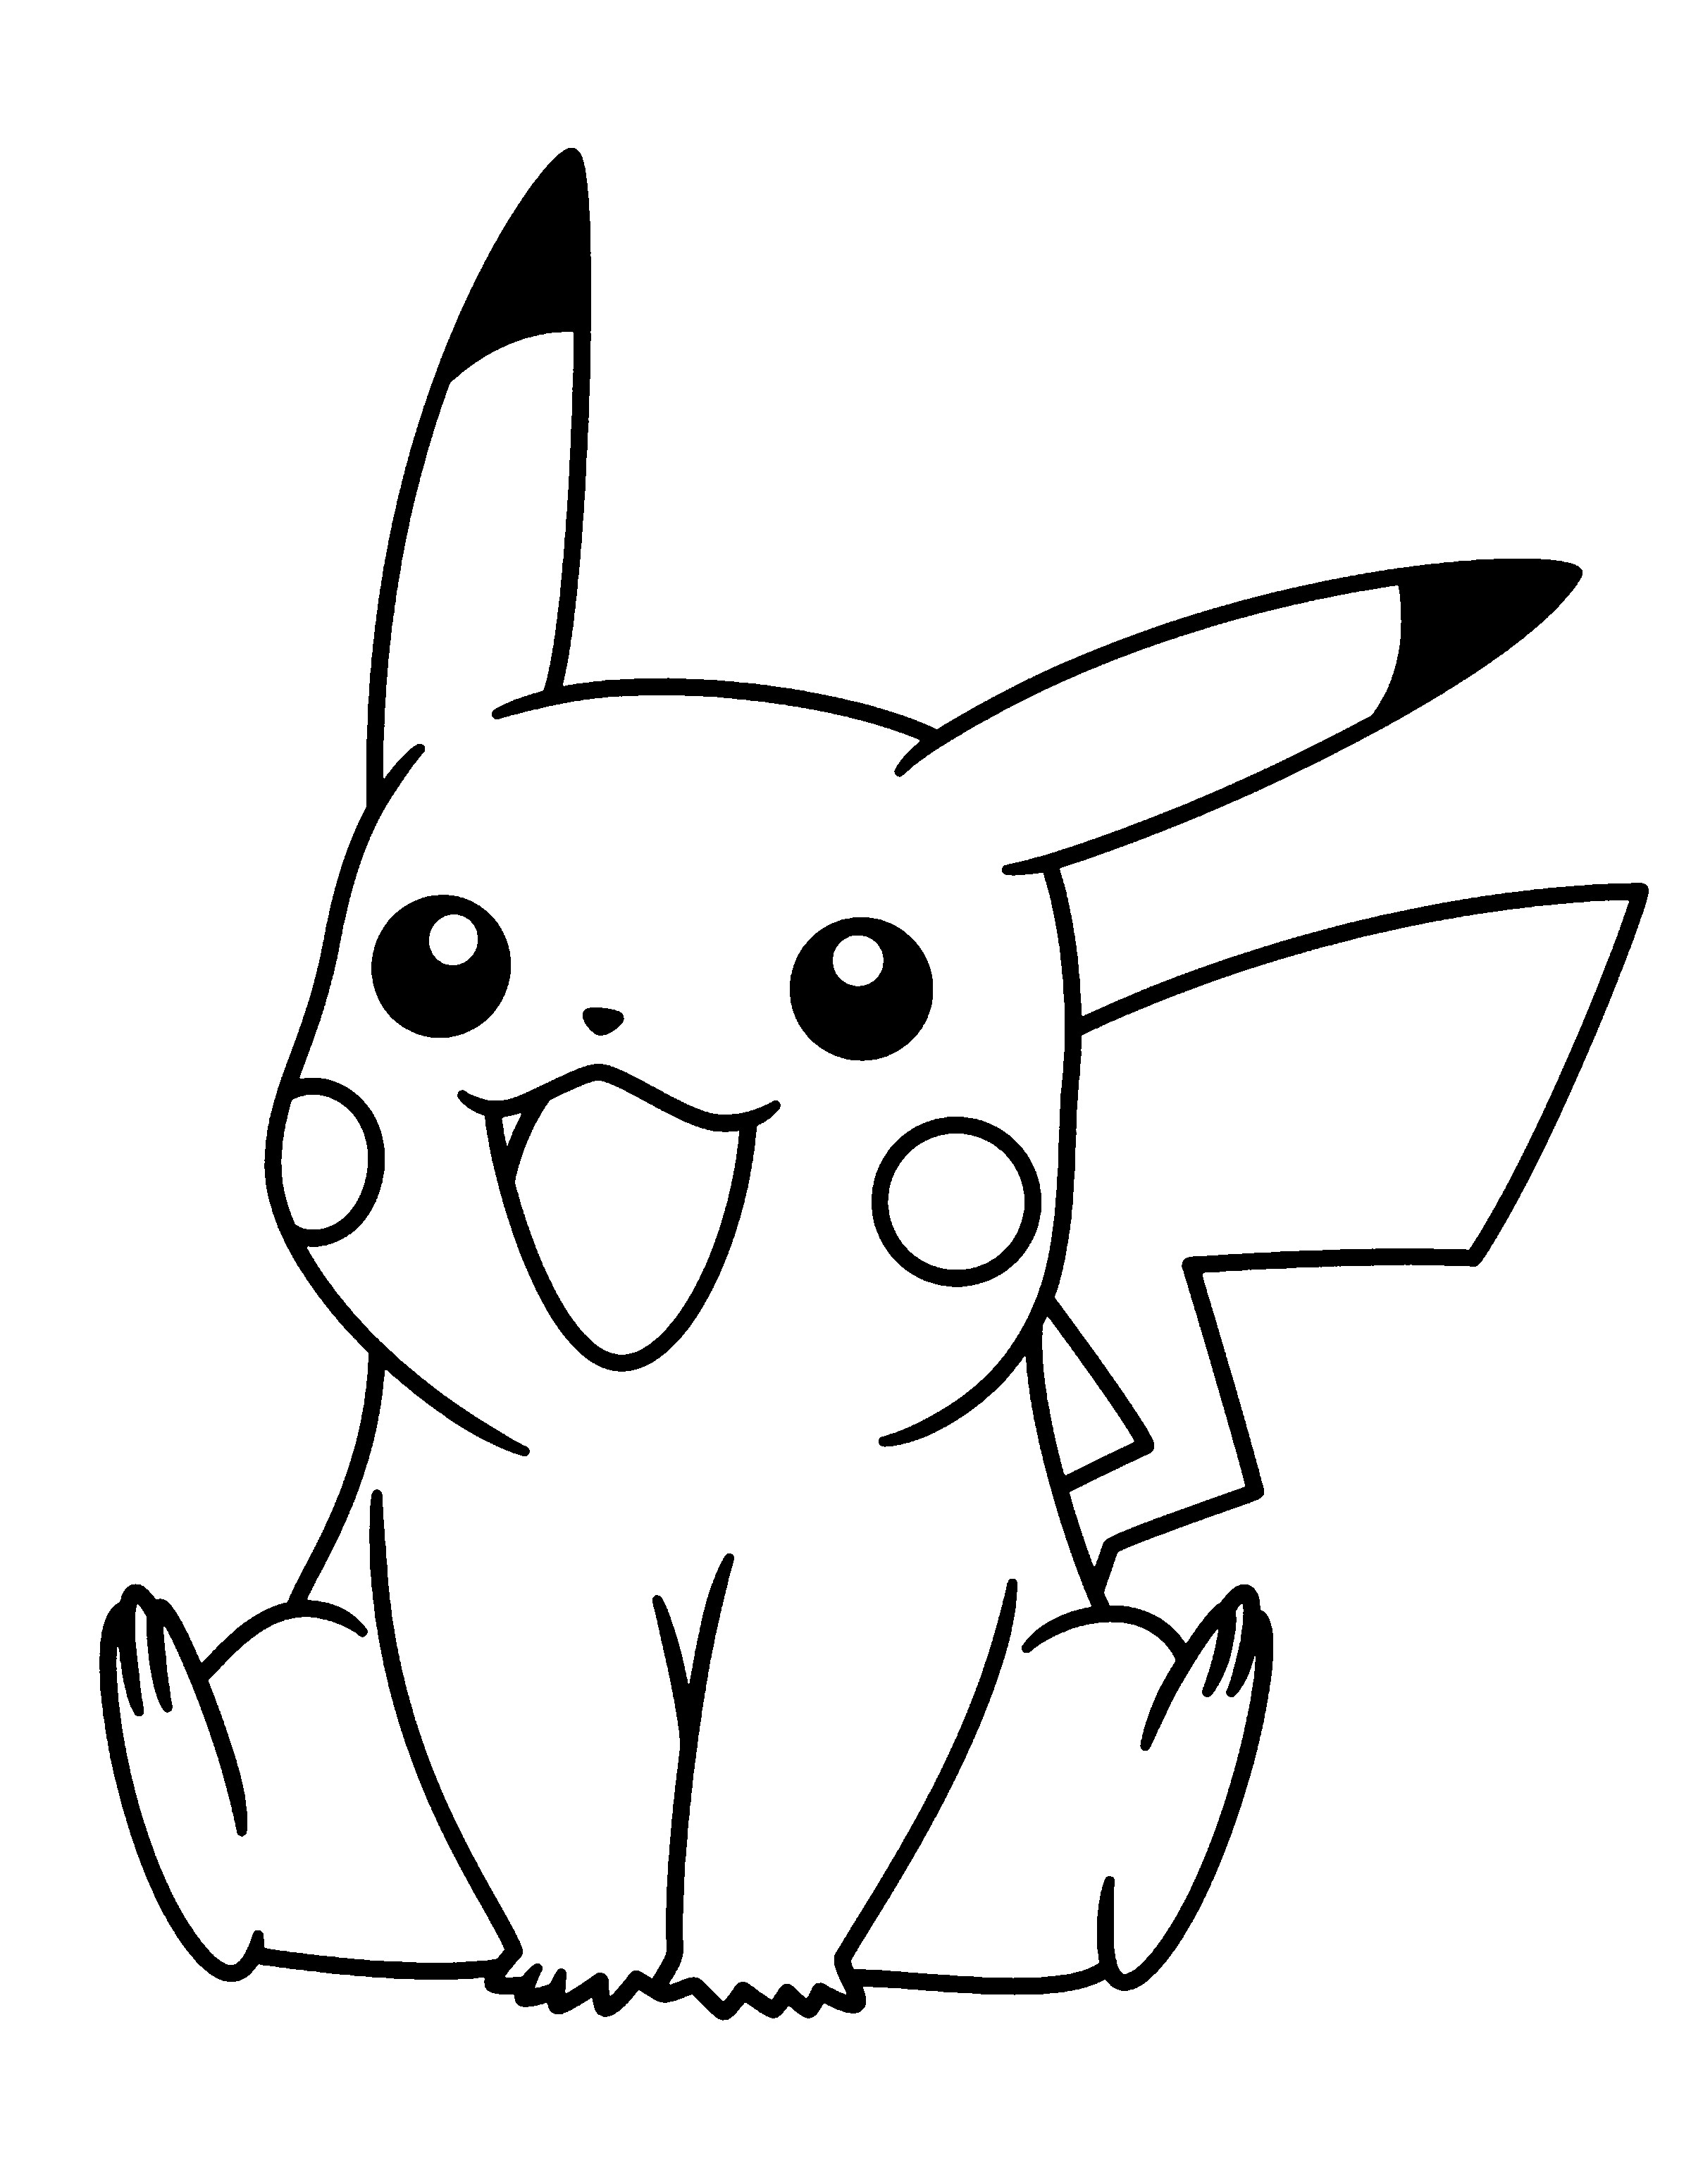 Pikachu Pokemon coloring pages